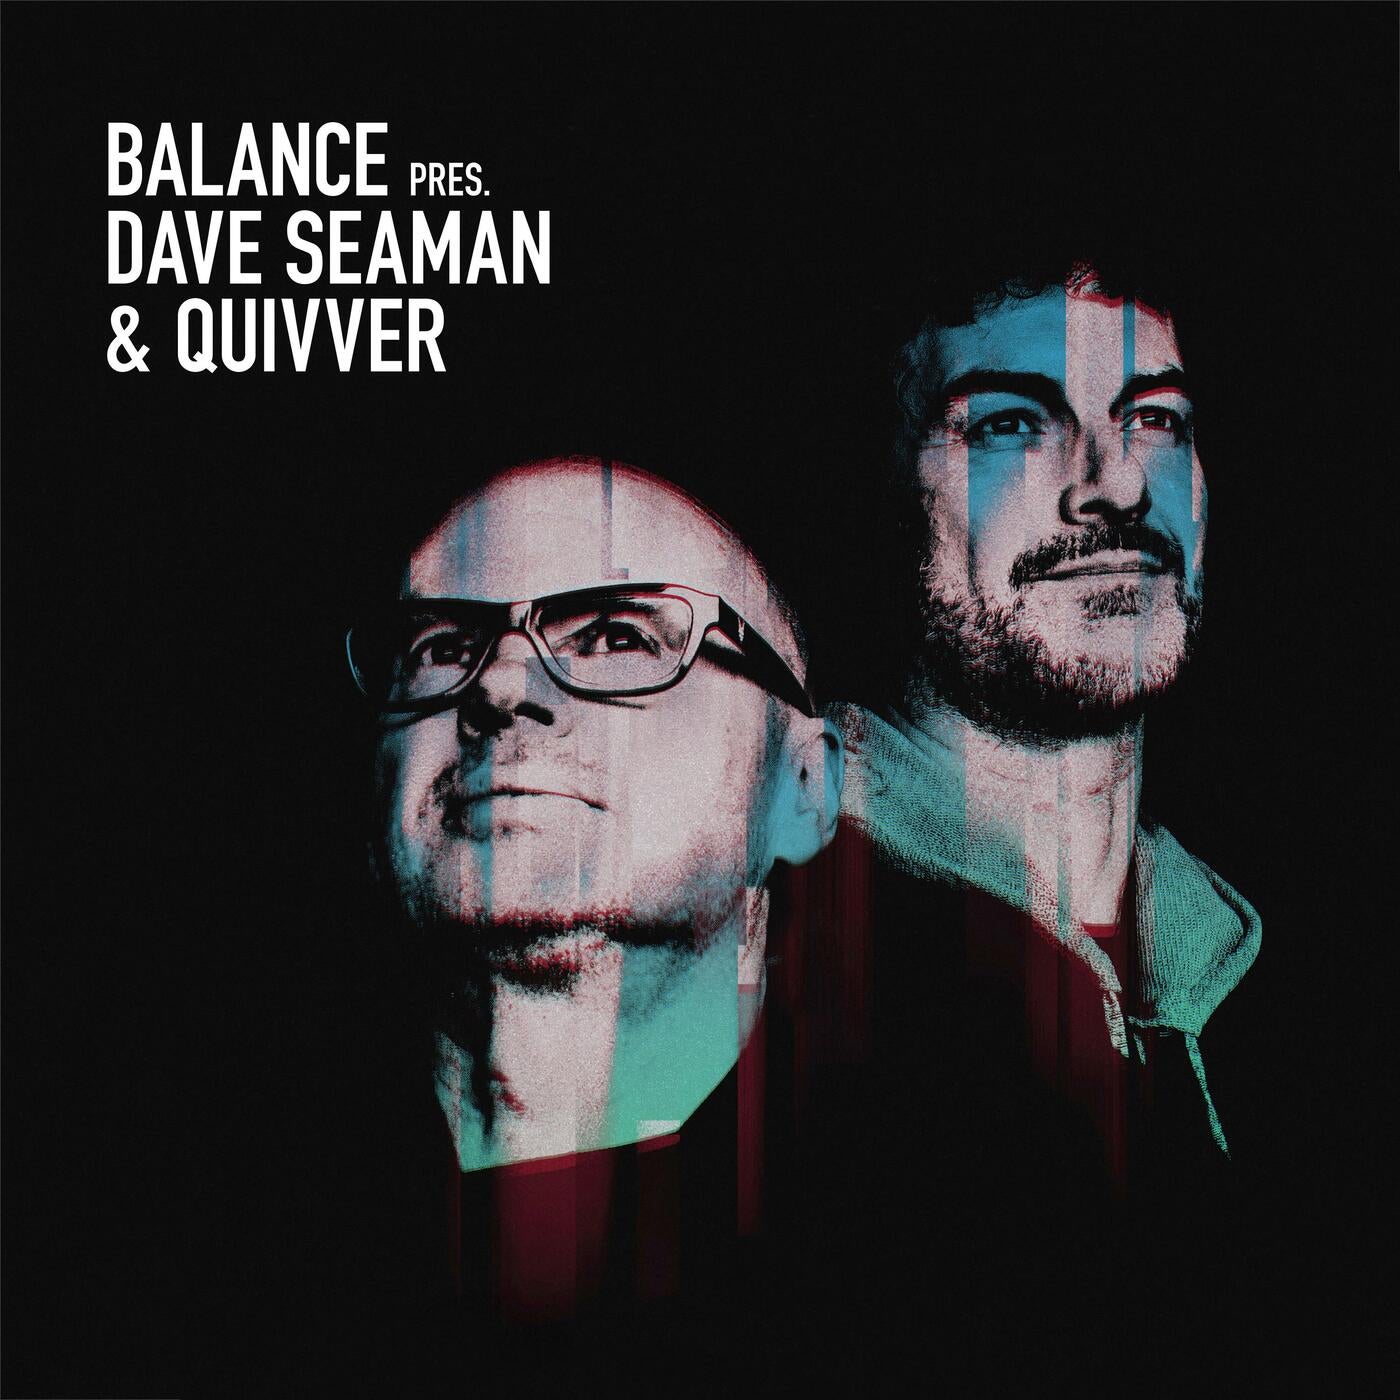 Release Cover: Balance presents Dave Seaman & Quivver Download Free on Electrobuzz